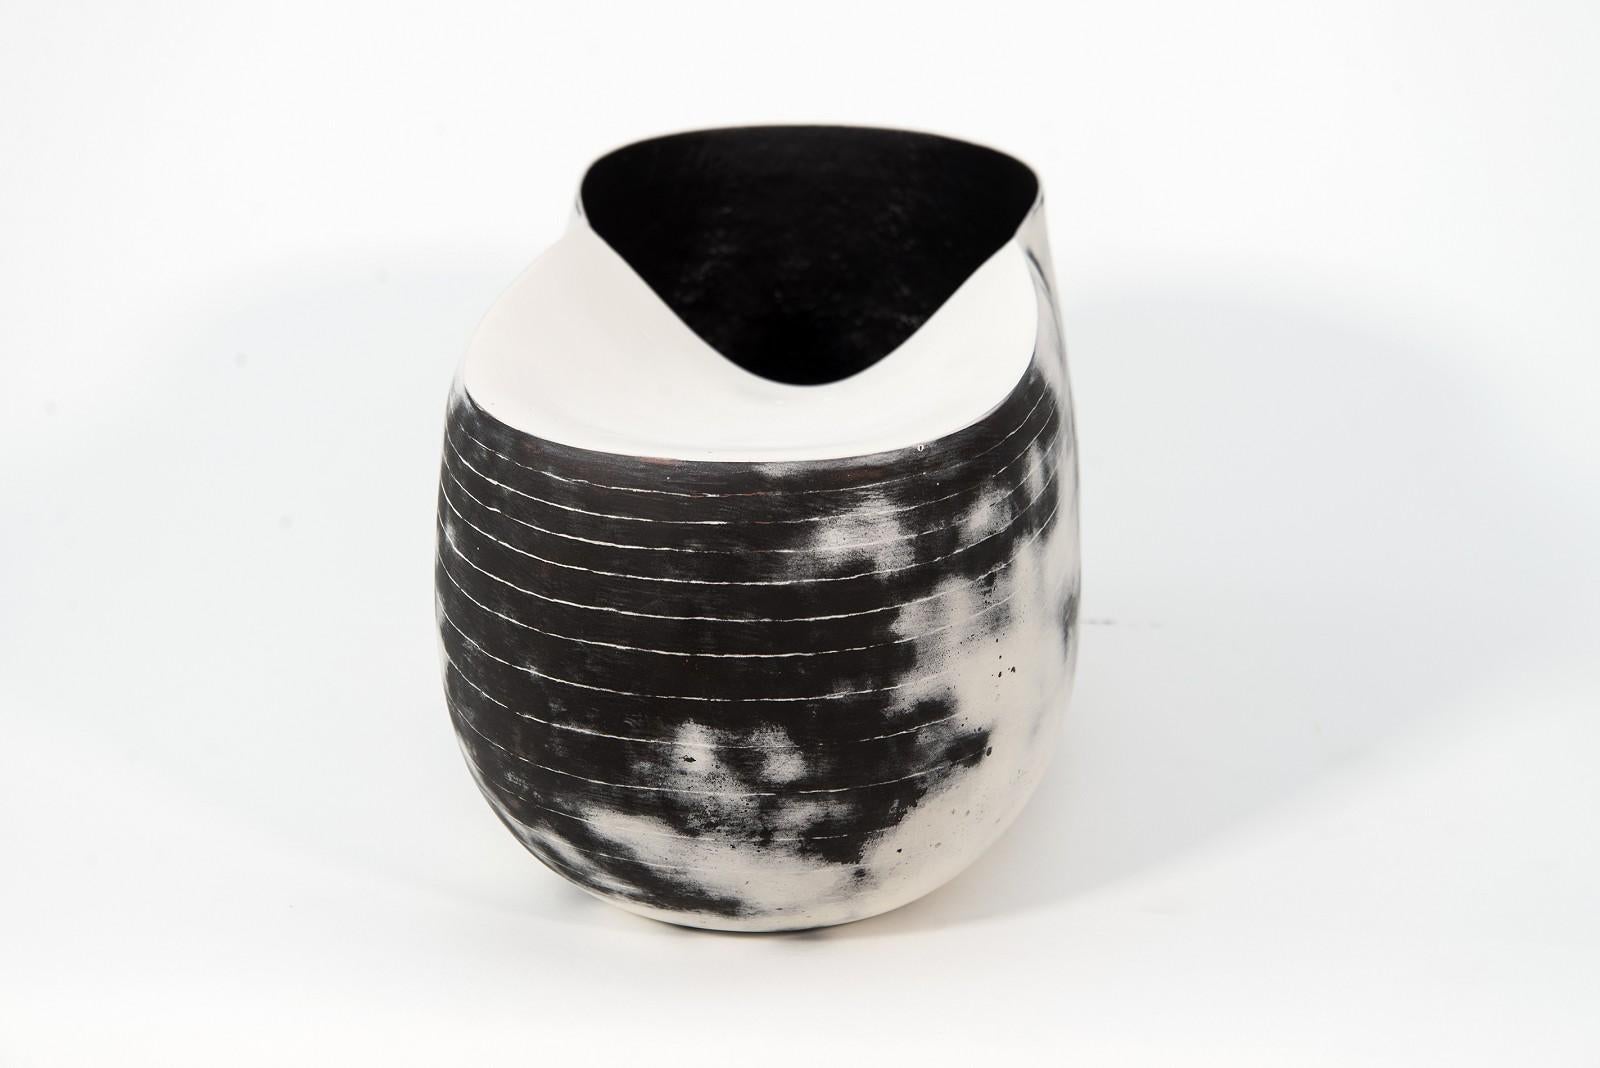 Borealis - black and white, nature inspired, elongated, ceramic, tabletop vessel - Contemporary Sculpture by Steven Heinemann